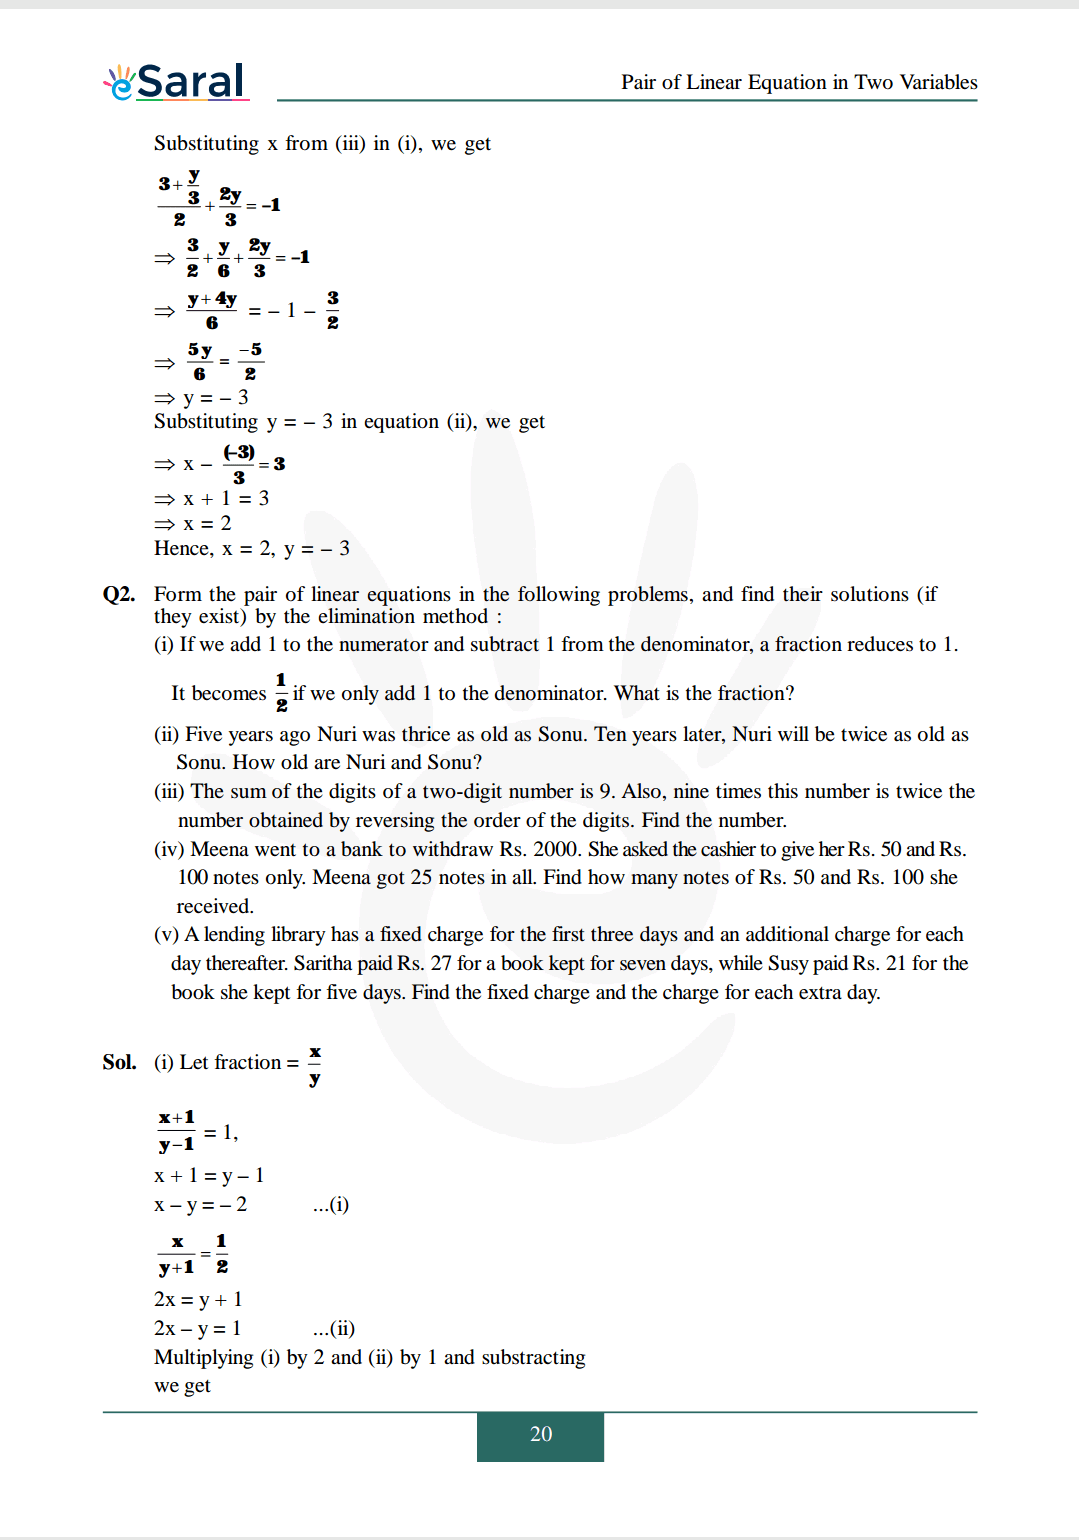 Class 10 Maths Chapter 3 exercise 3.4 solutions Image 4